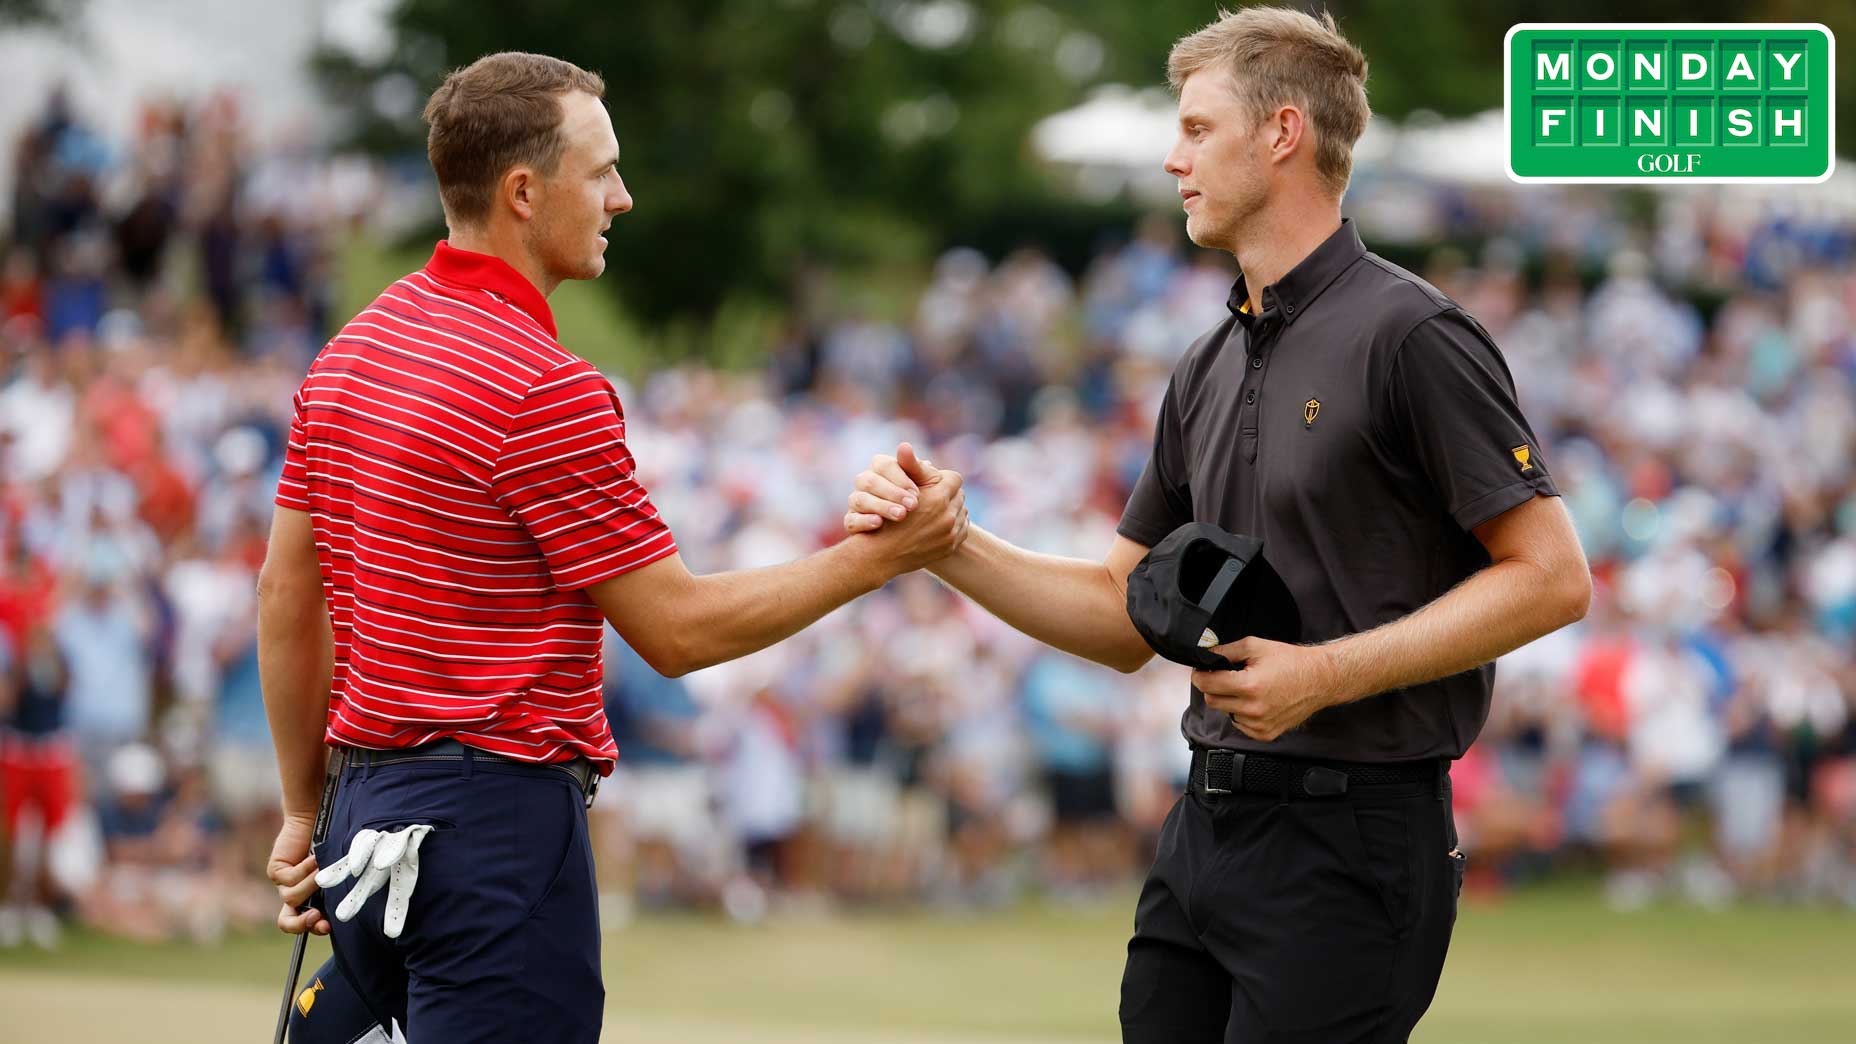 Jordan Spieth and Cameron Davis on Sunday at the Presidents Cup.